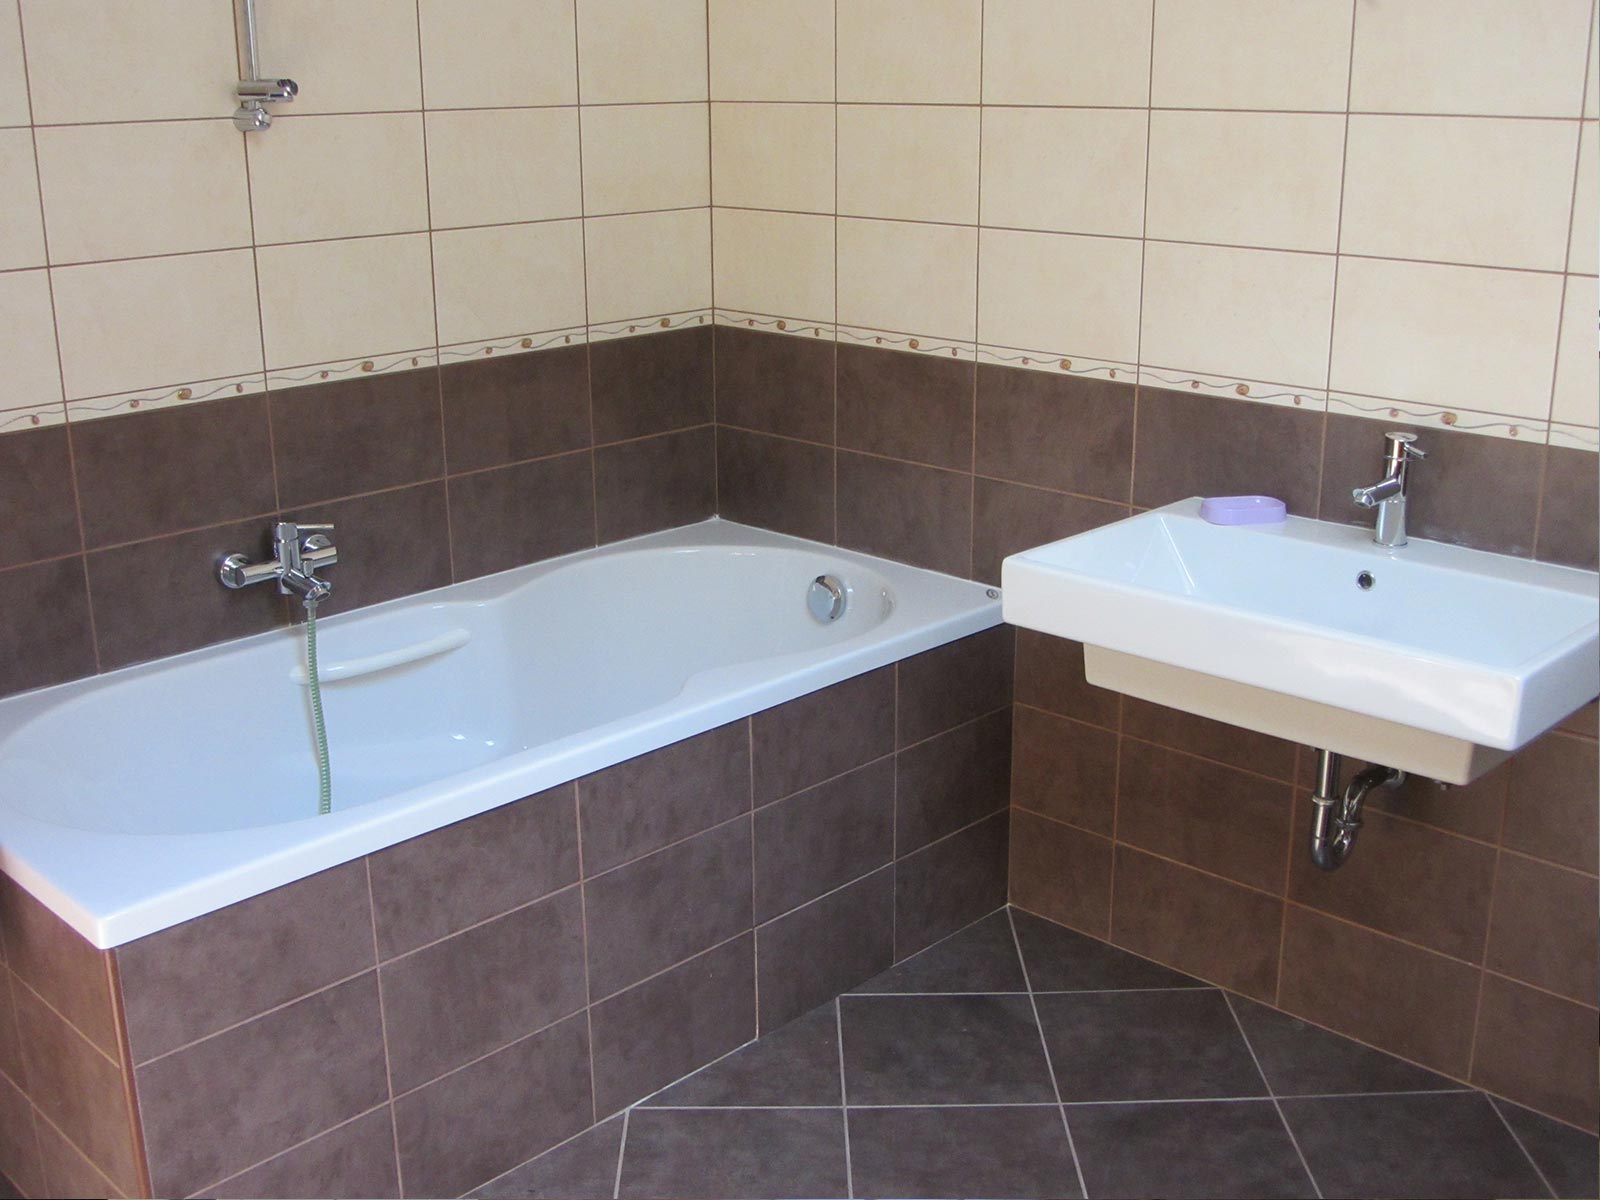 Rent a house with bathroom slovenia, vacation, accommodation